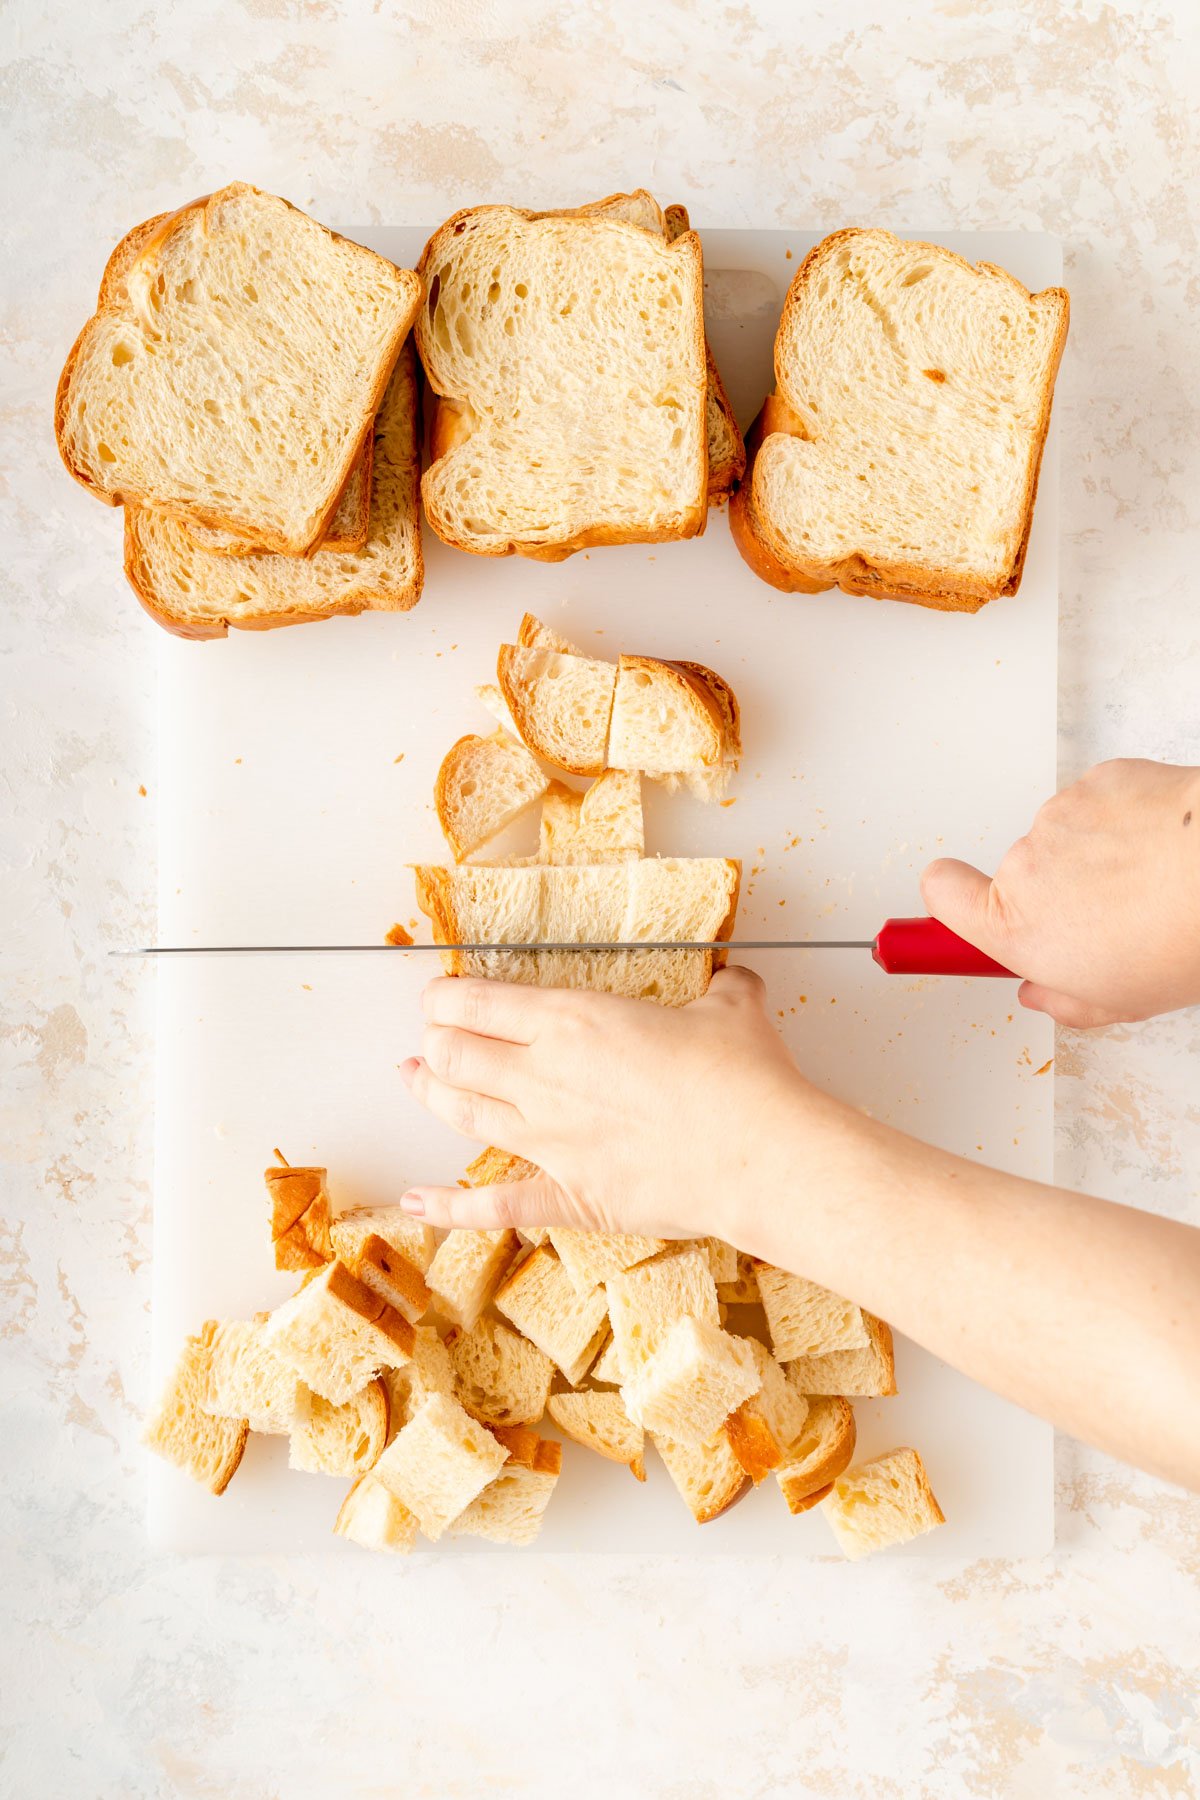 someone reaching into frame to cut brioche slices into cubes on a white cutting board.